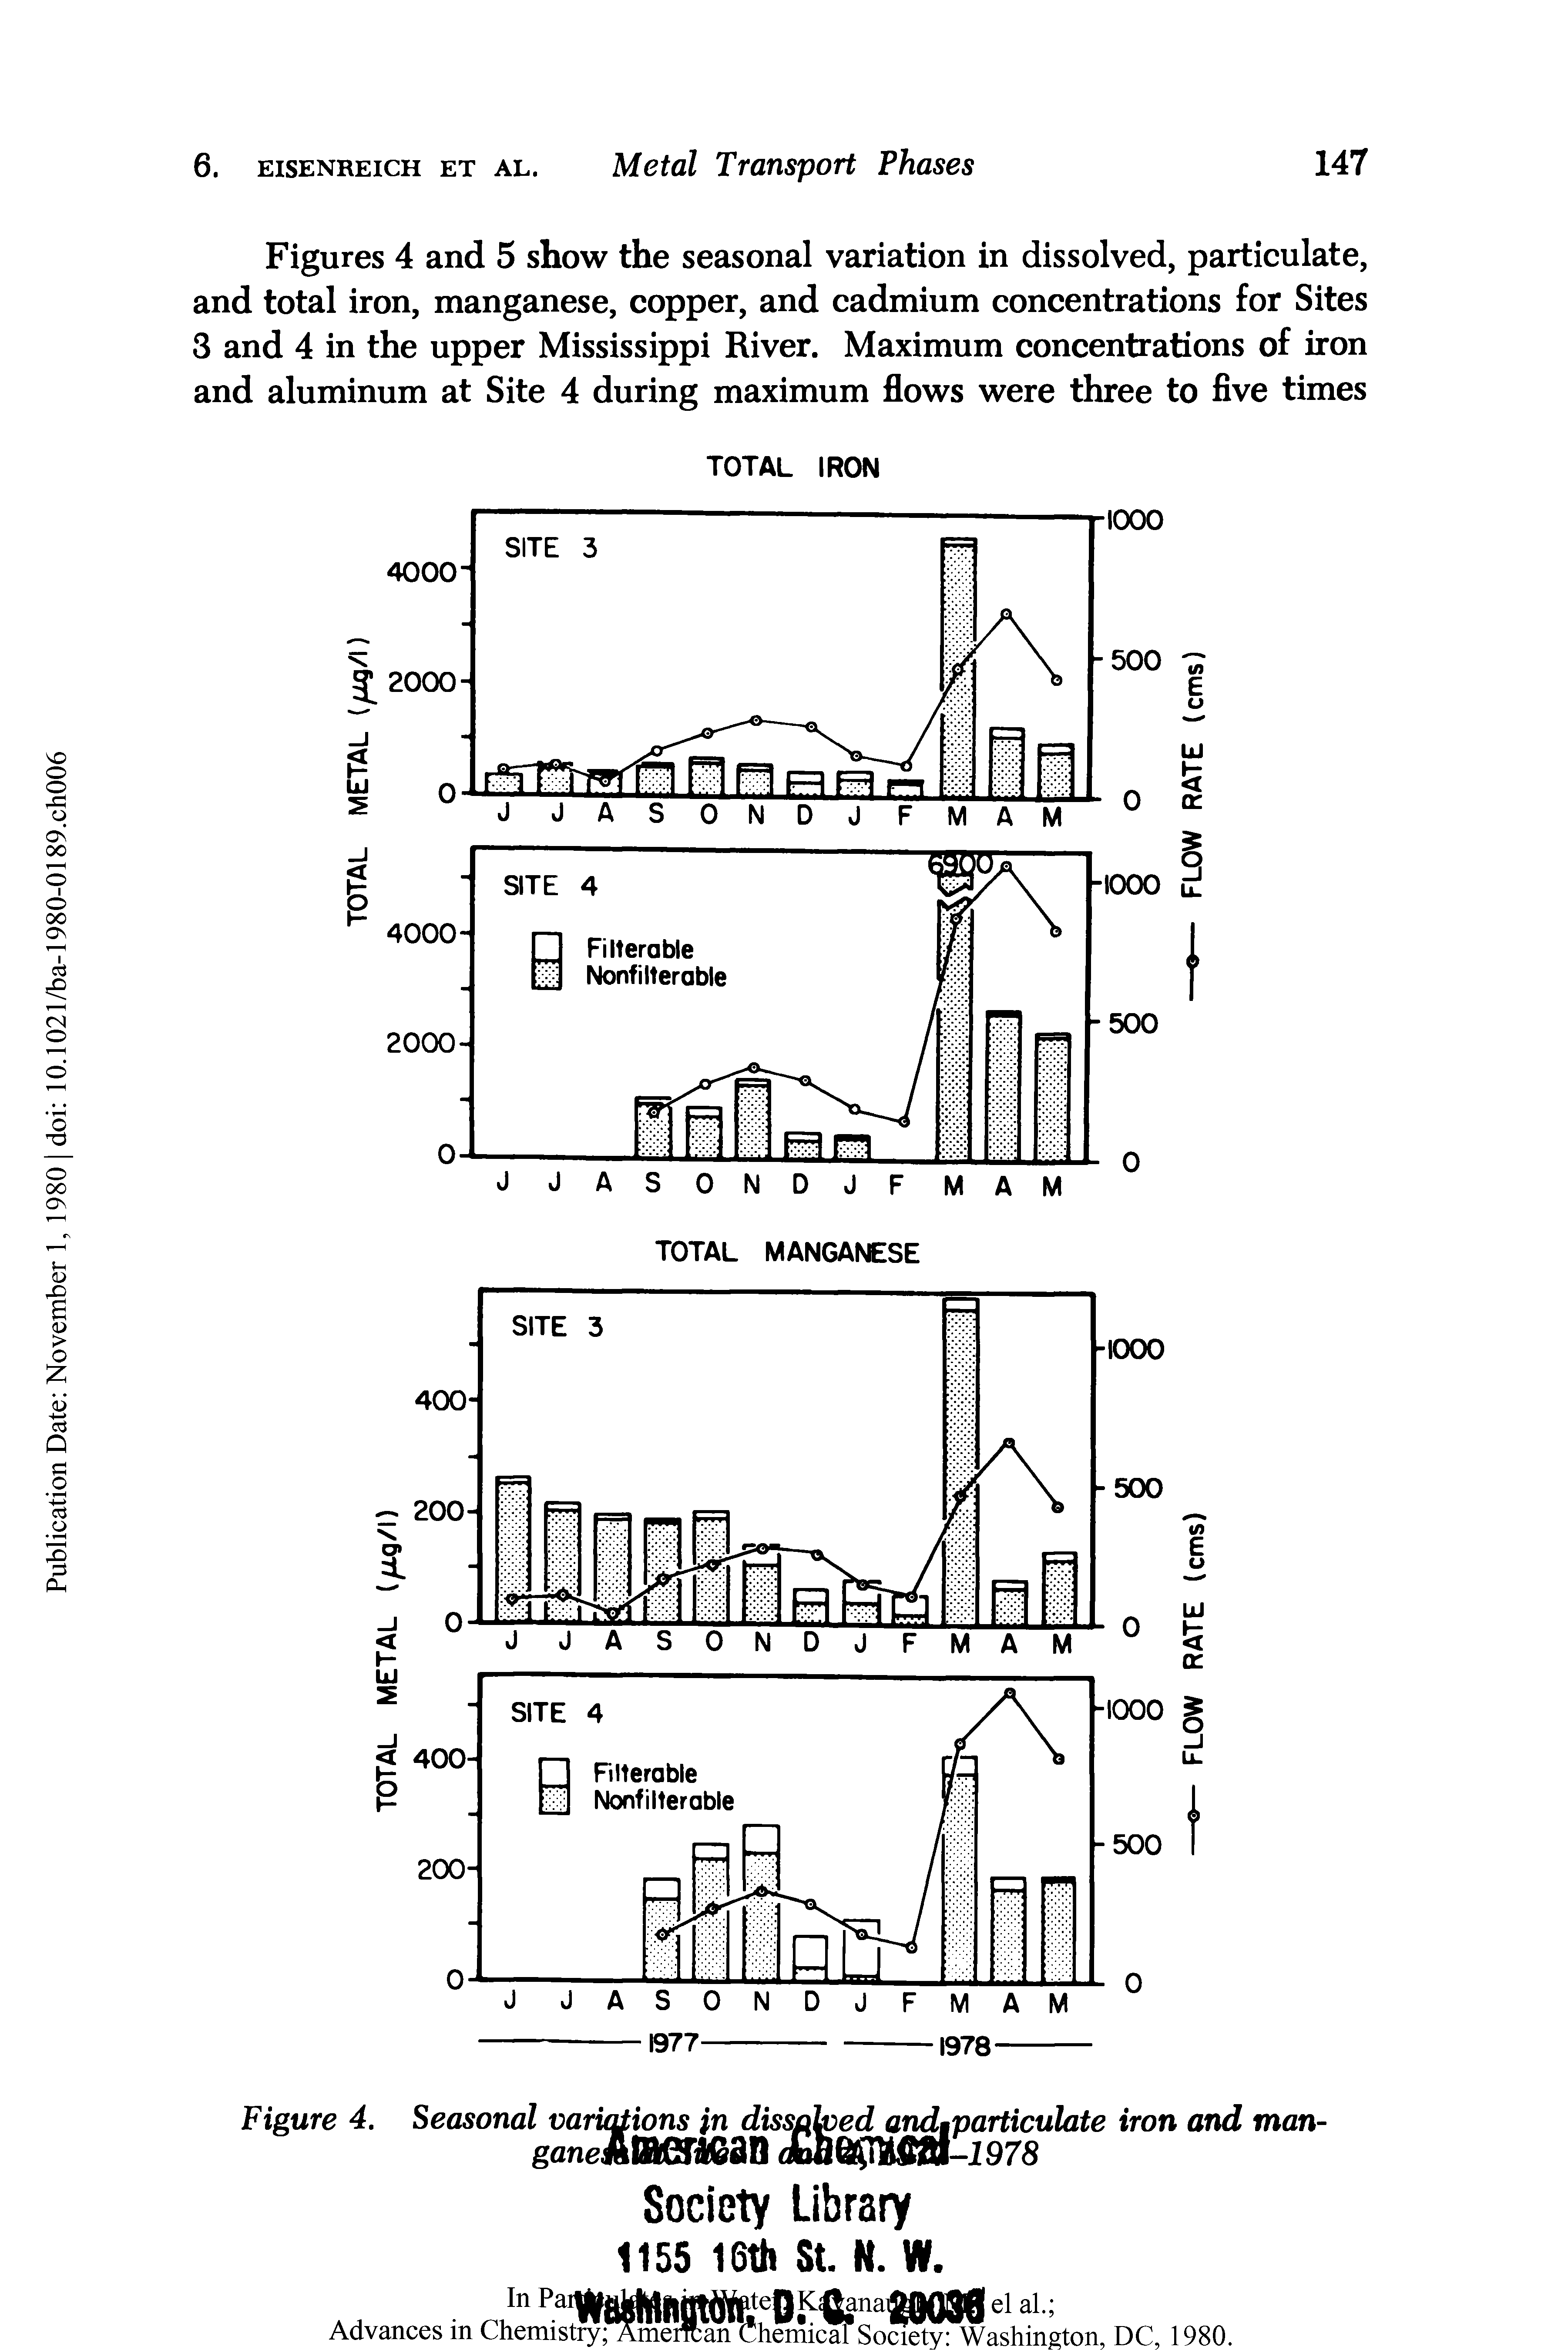 Figures 4 and 5 show the seasonal variation in dissolved, particulate, and total iron, manganese, copper, and cadmium concentrations for Sites 3 and 4 in the upper Mississippi River. Maximum concentrations of iron and aluminum at Site 4 during maximum flows were three to five times...